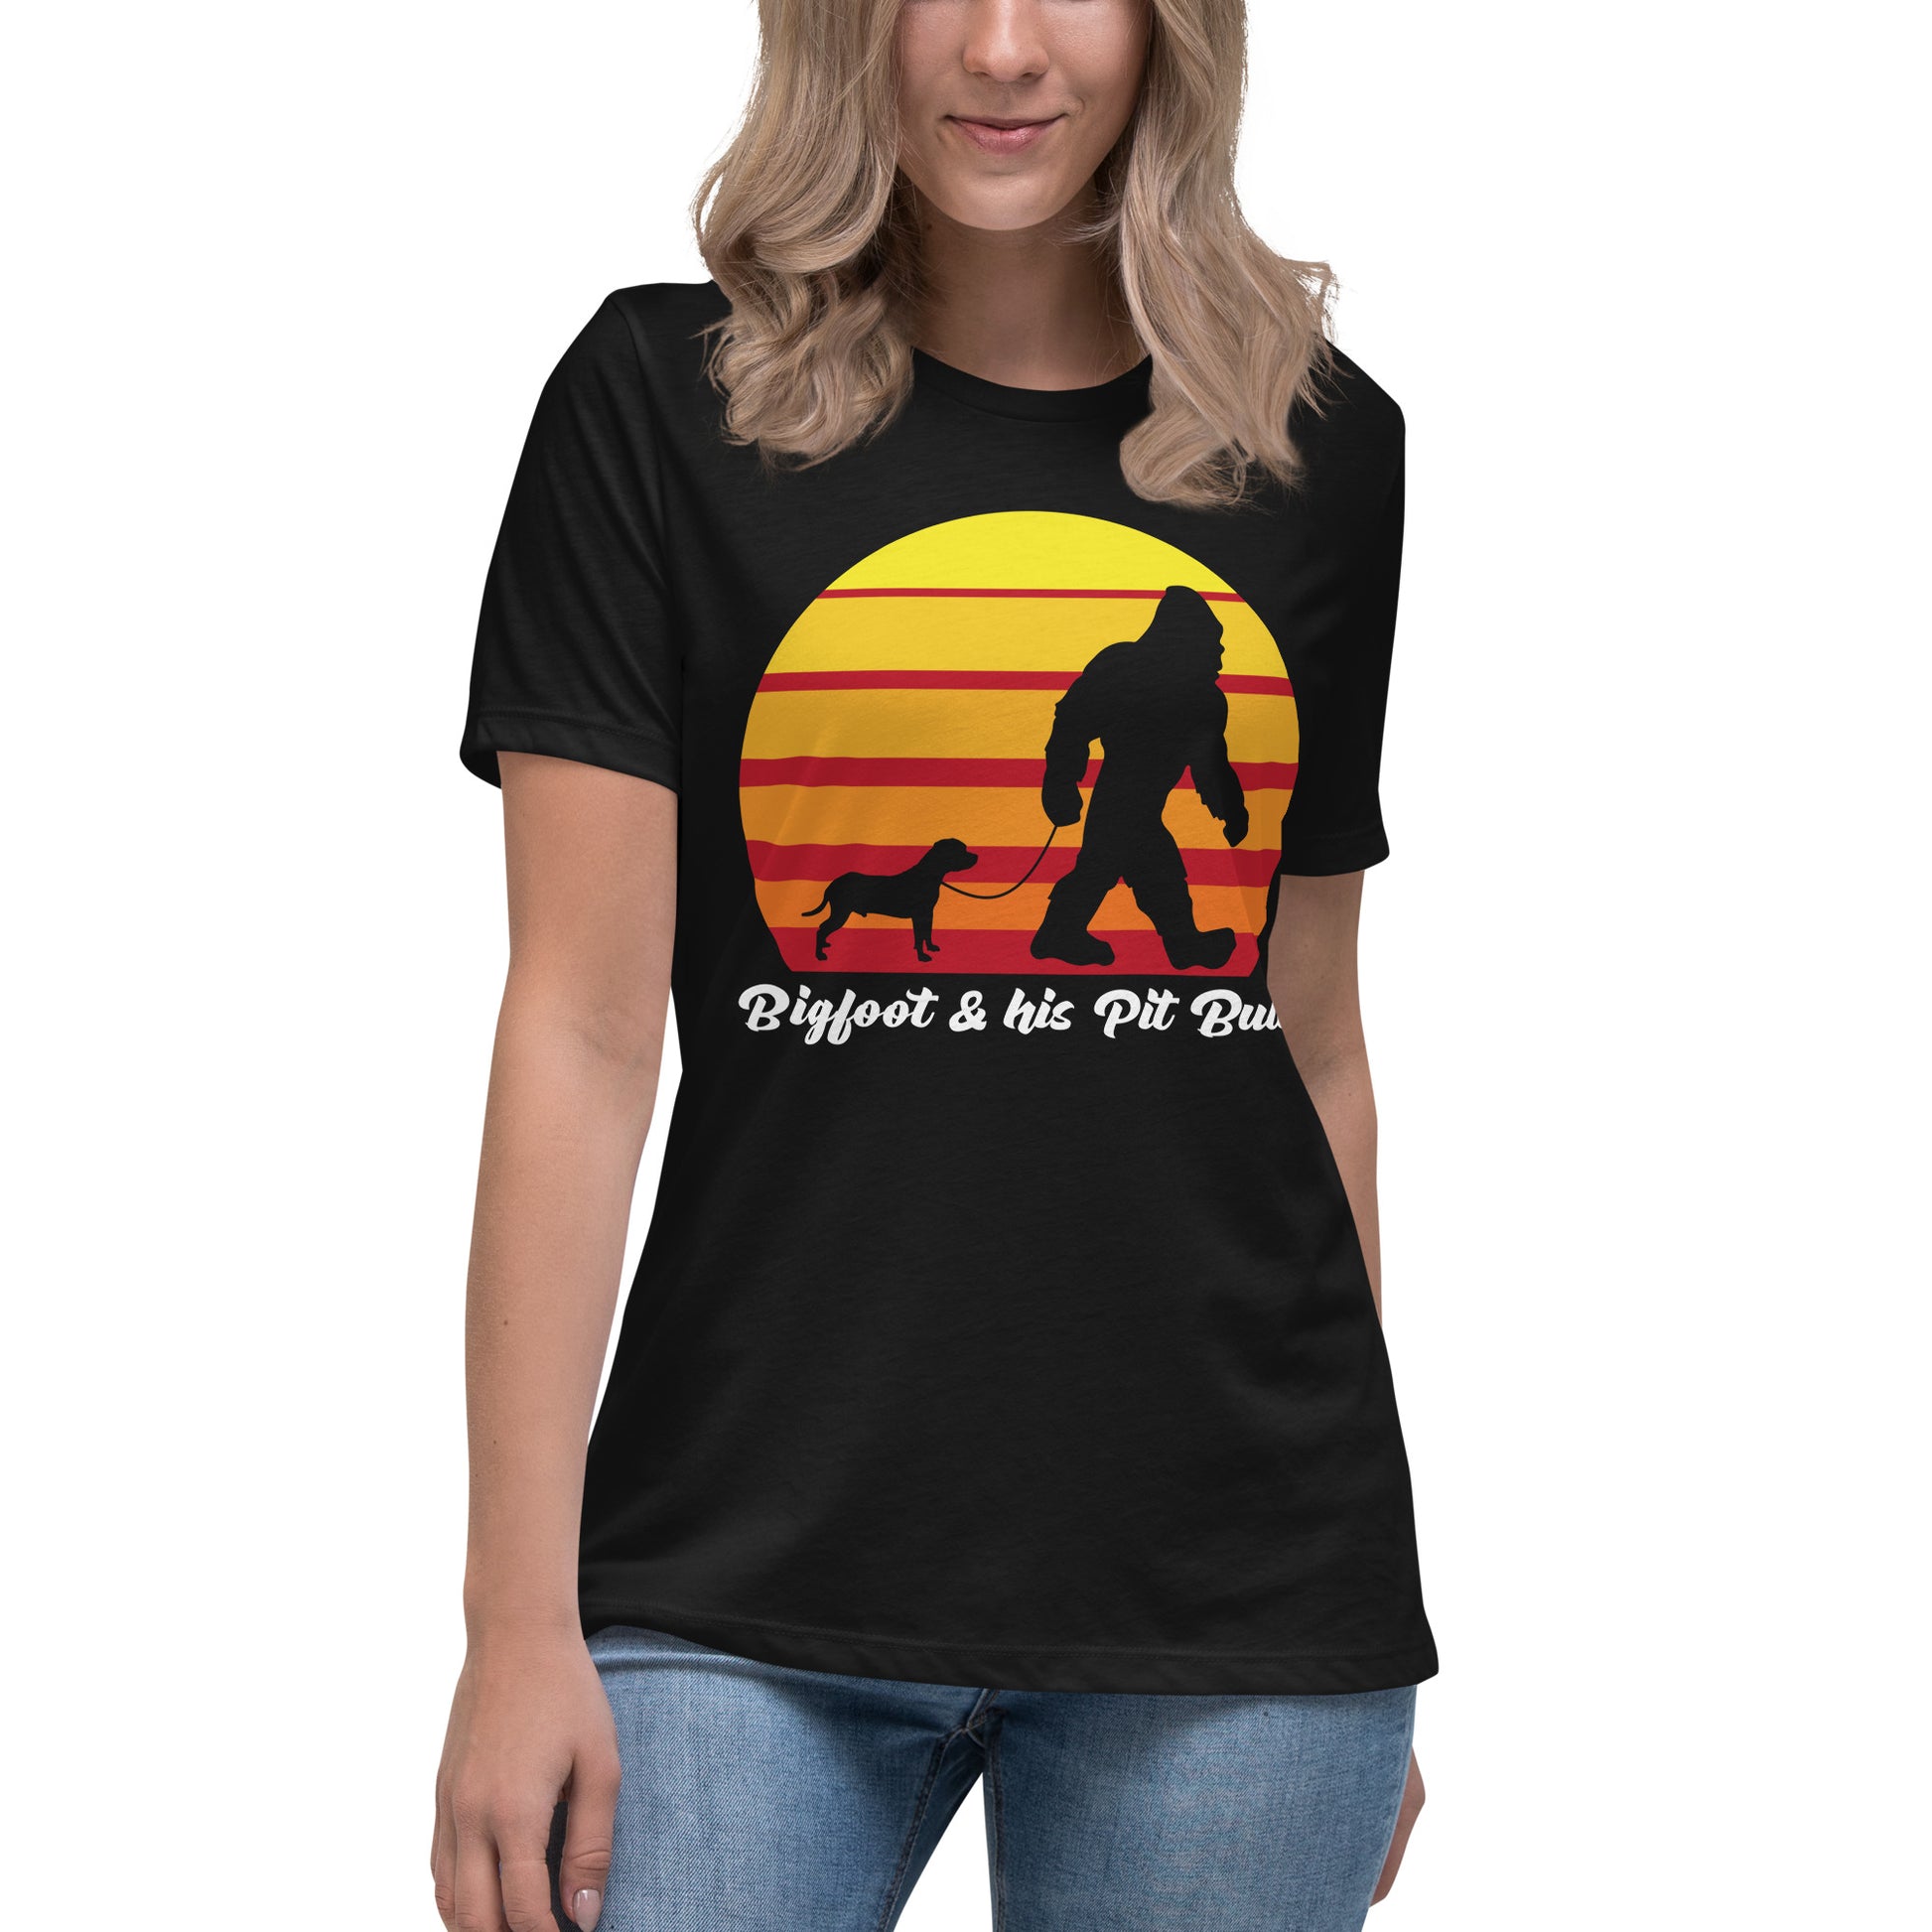 Bigfoot and his American Pit Bull women’s black t-shirt by Dog Artistry.